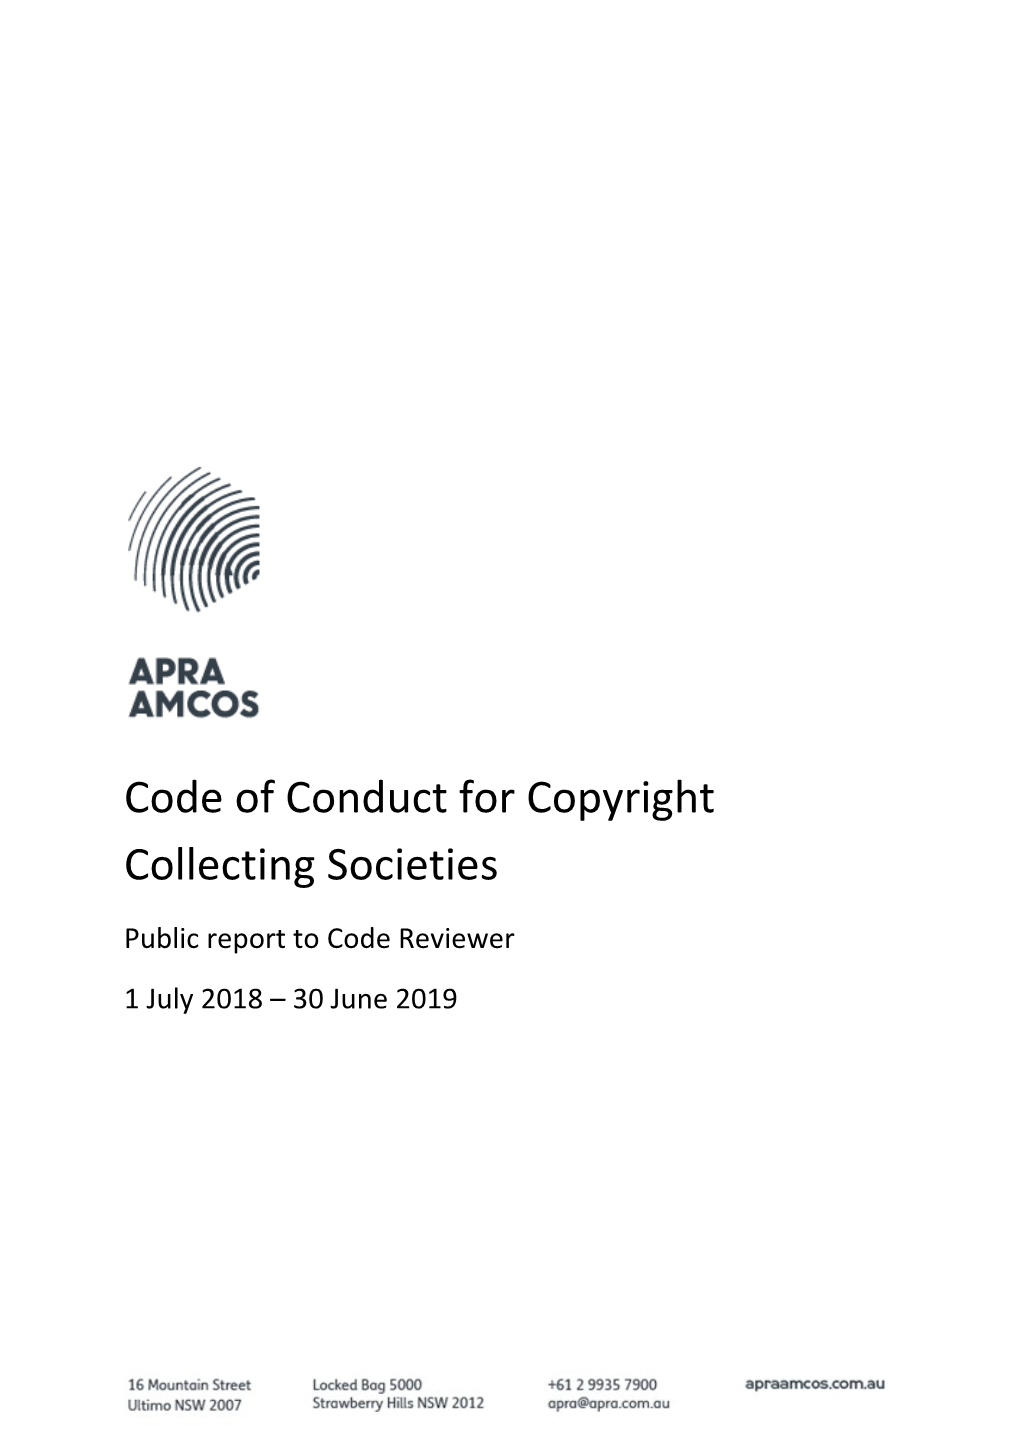 Code of Conduct for Copyright Collecting Societies